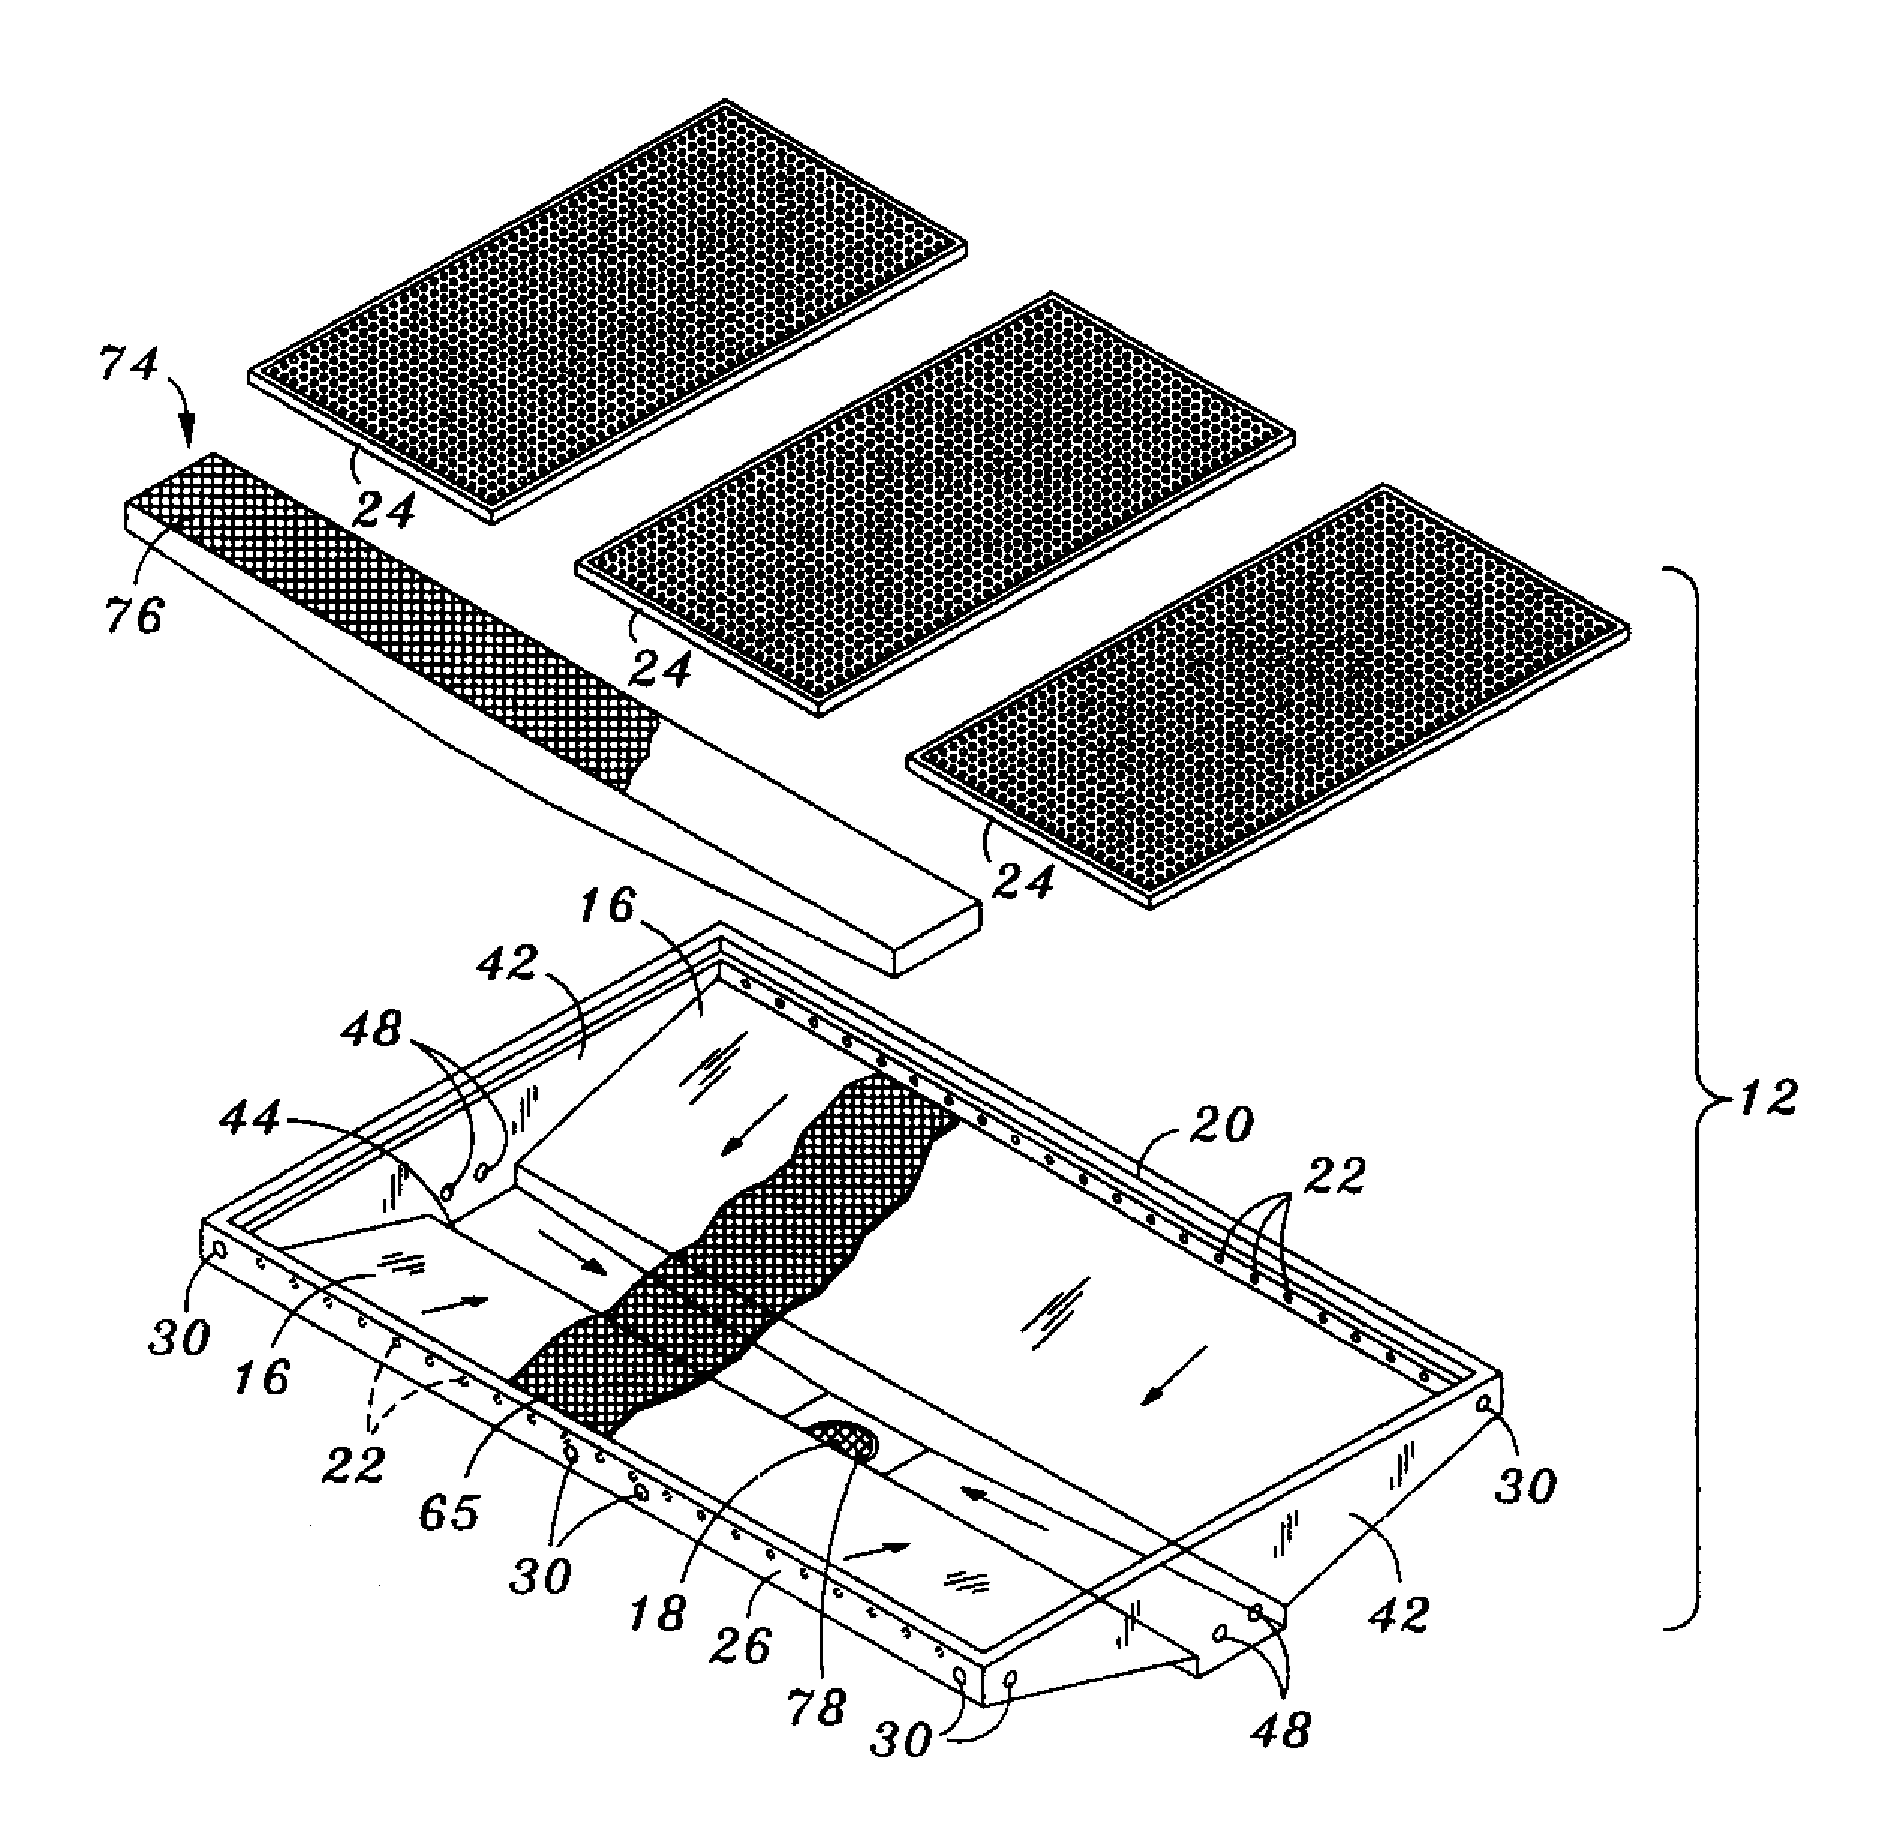 Self-cleaning flooring system